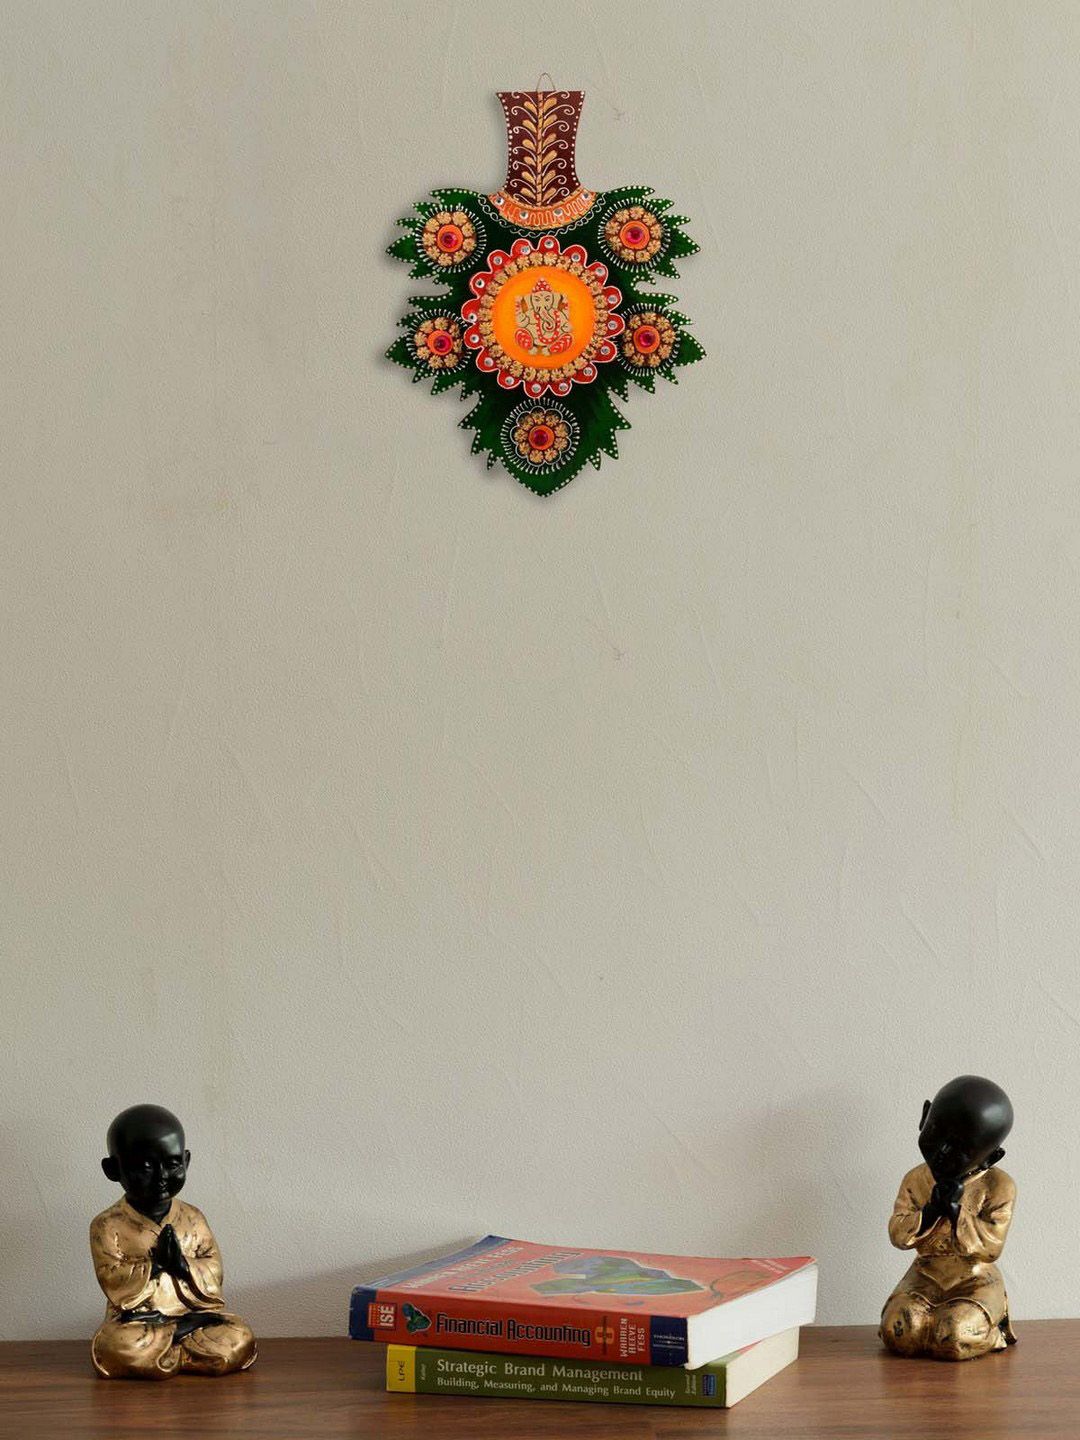 eCraftIndia Multicoloured Handcrafted Handcrafted Wooden Papier Mache Decorative Lord Ganesha Wall Hanging Price in India